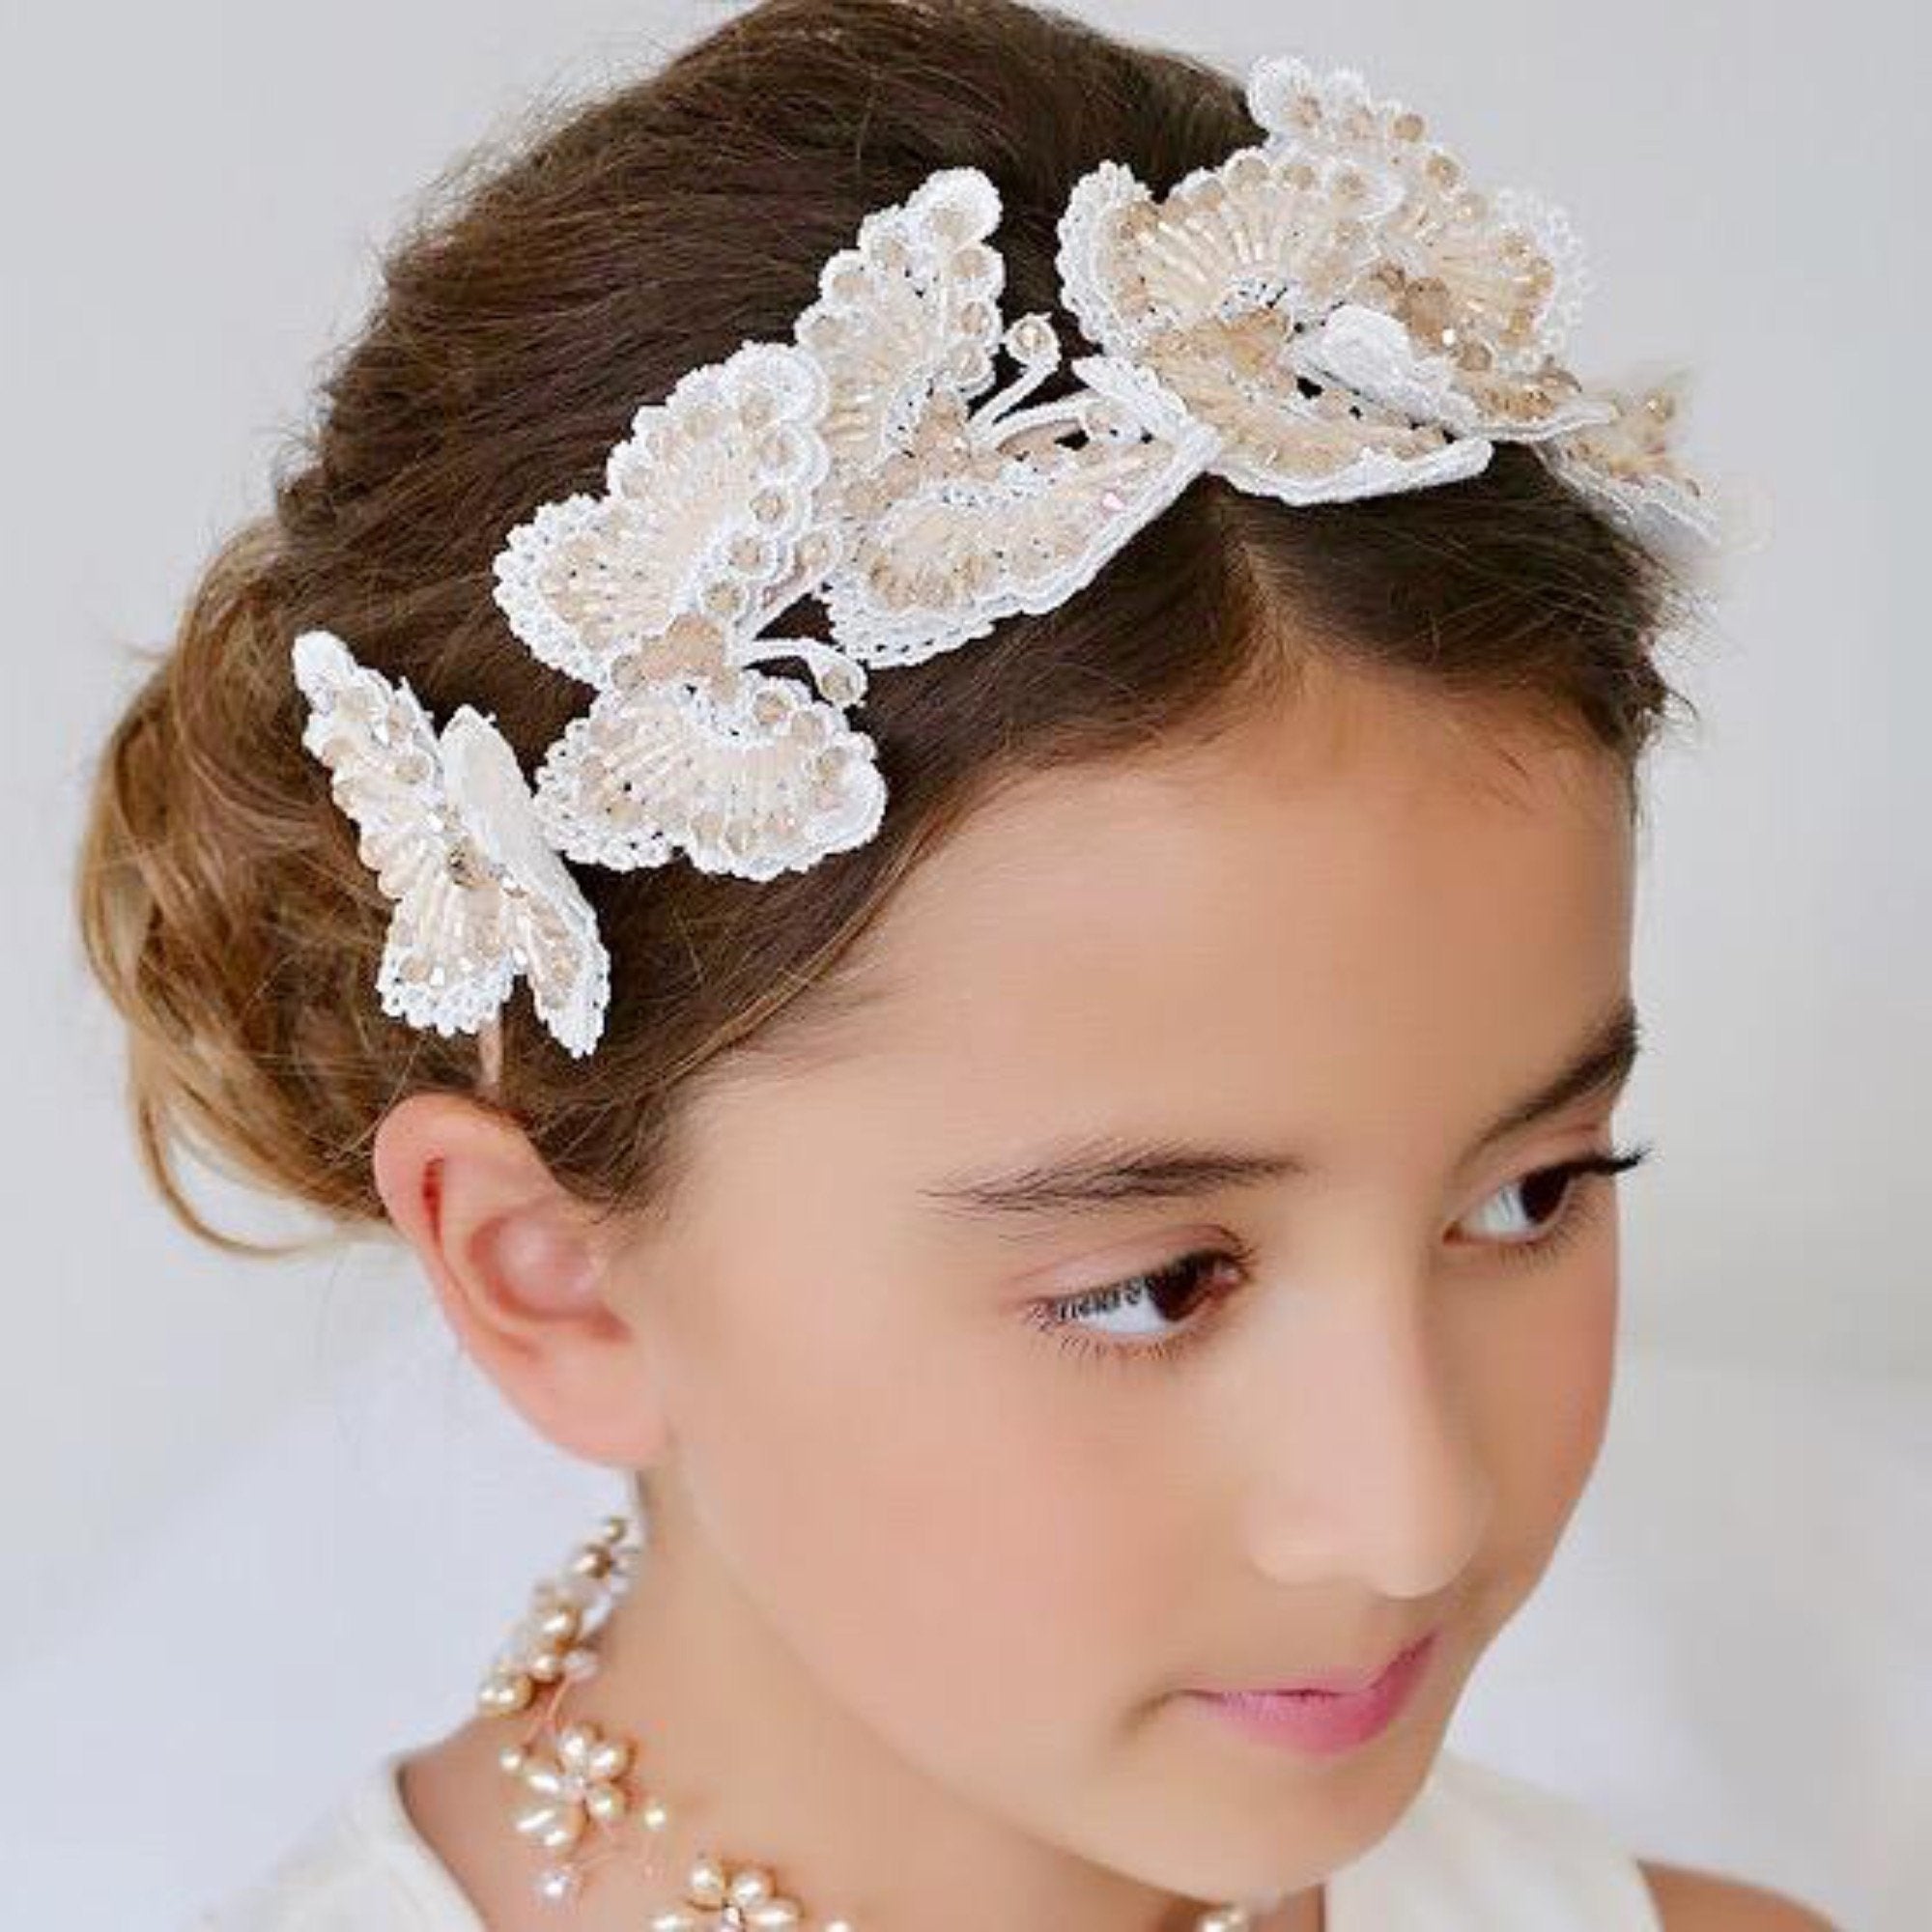 Sienna Likes To Party Girls The Monarchy Butterfly Luxury Girls Headband